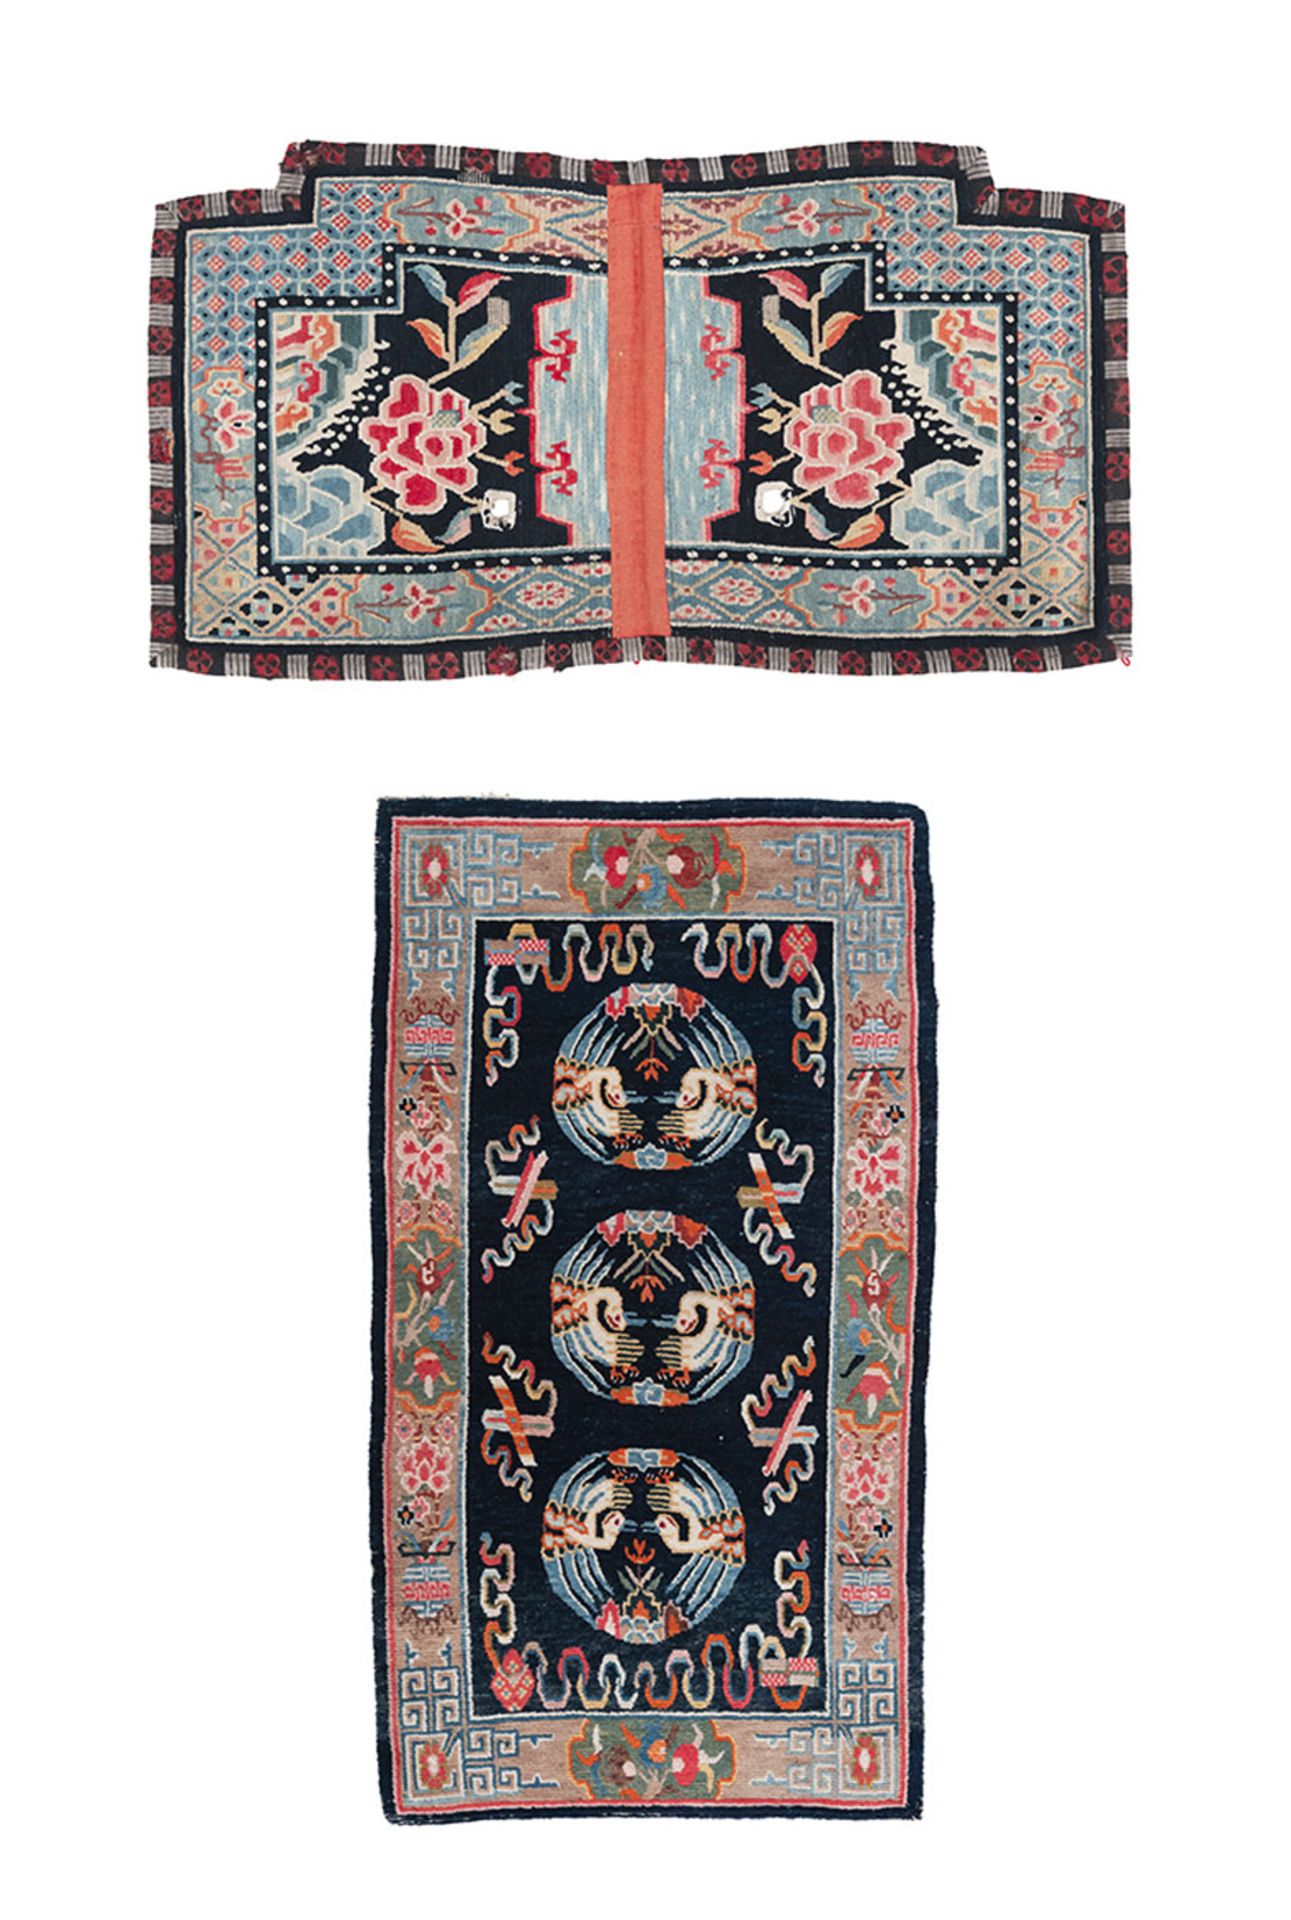 A TIBETAN RUG AND A TIBETAN SADDLE COVER WITH PHOENIX AND LOTOS PATTERNS